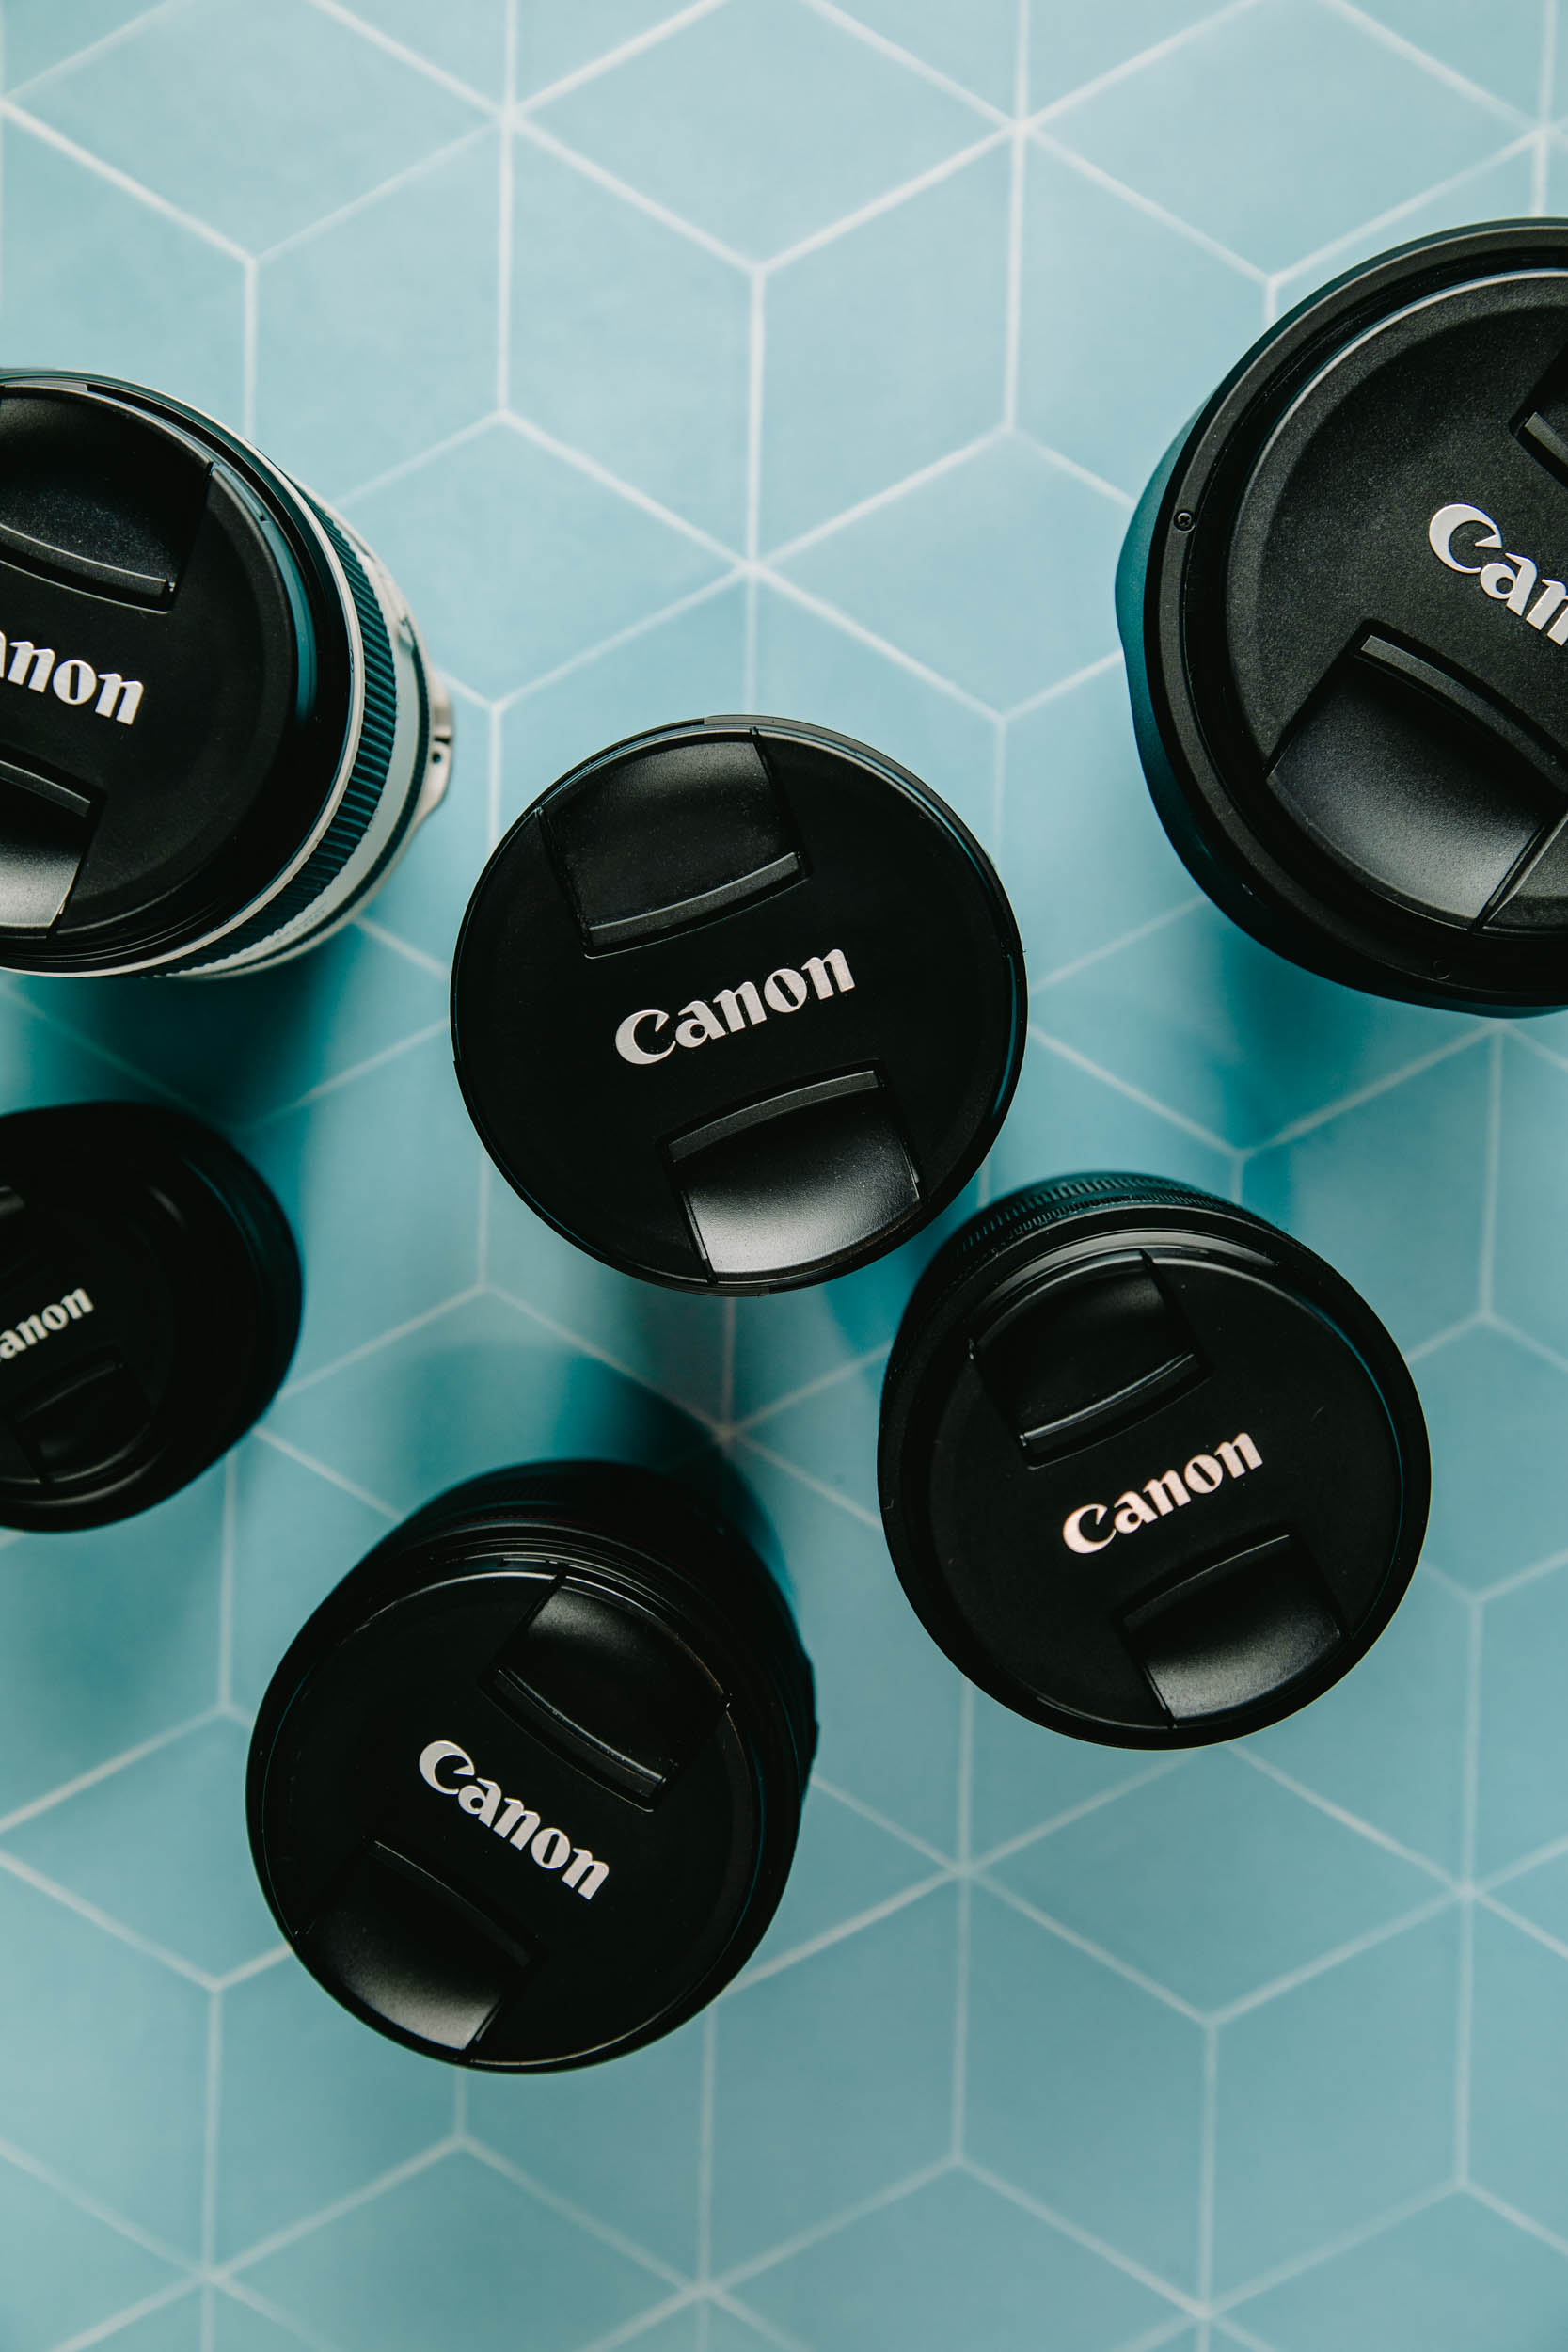 overhead view of six Canon lenses on a teal surface, including the top travel lenses.